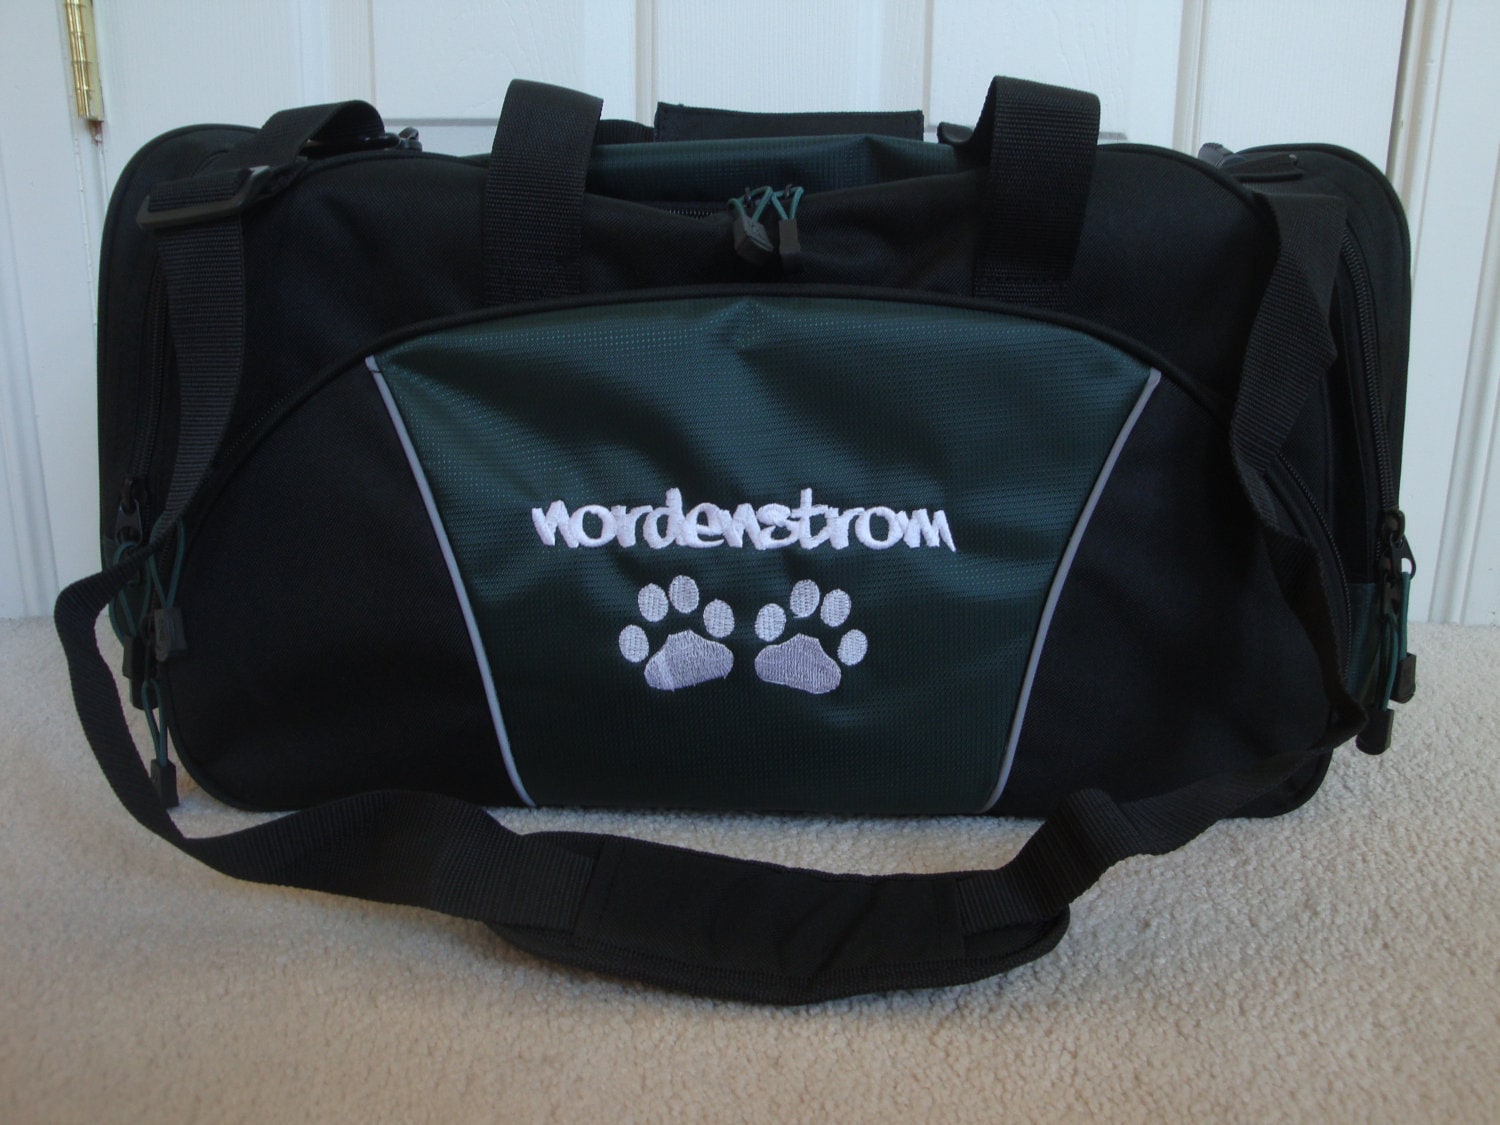 Duffel Bag Personalized Dog Paw Prints Vet by HTsCreations on Etsy